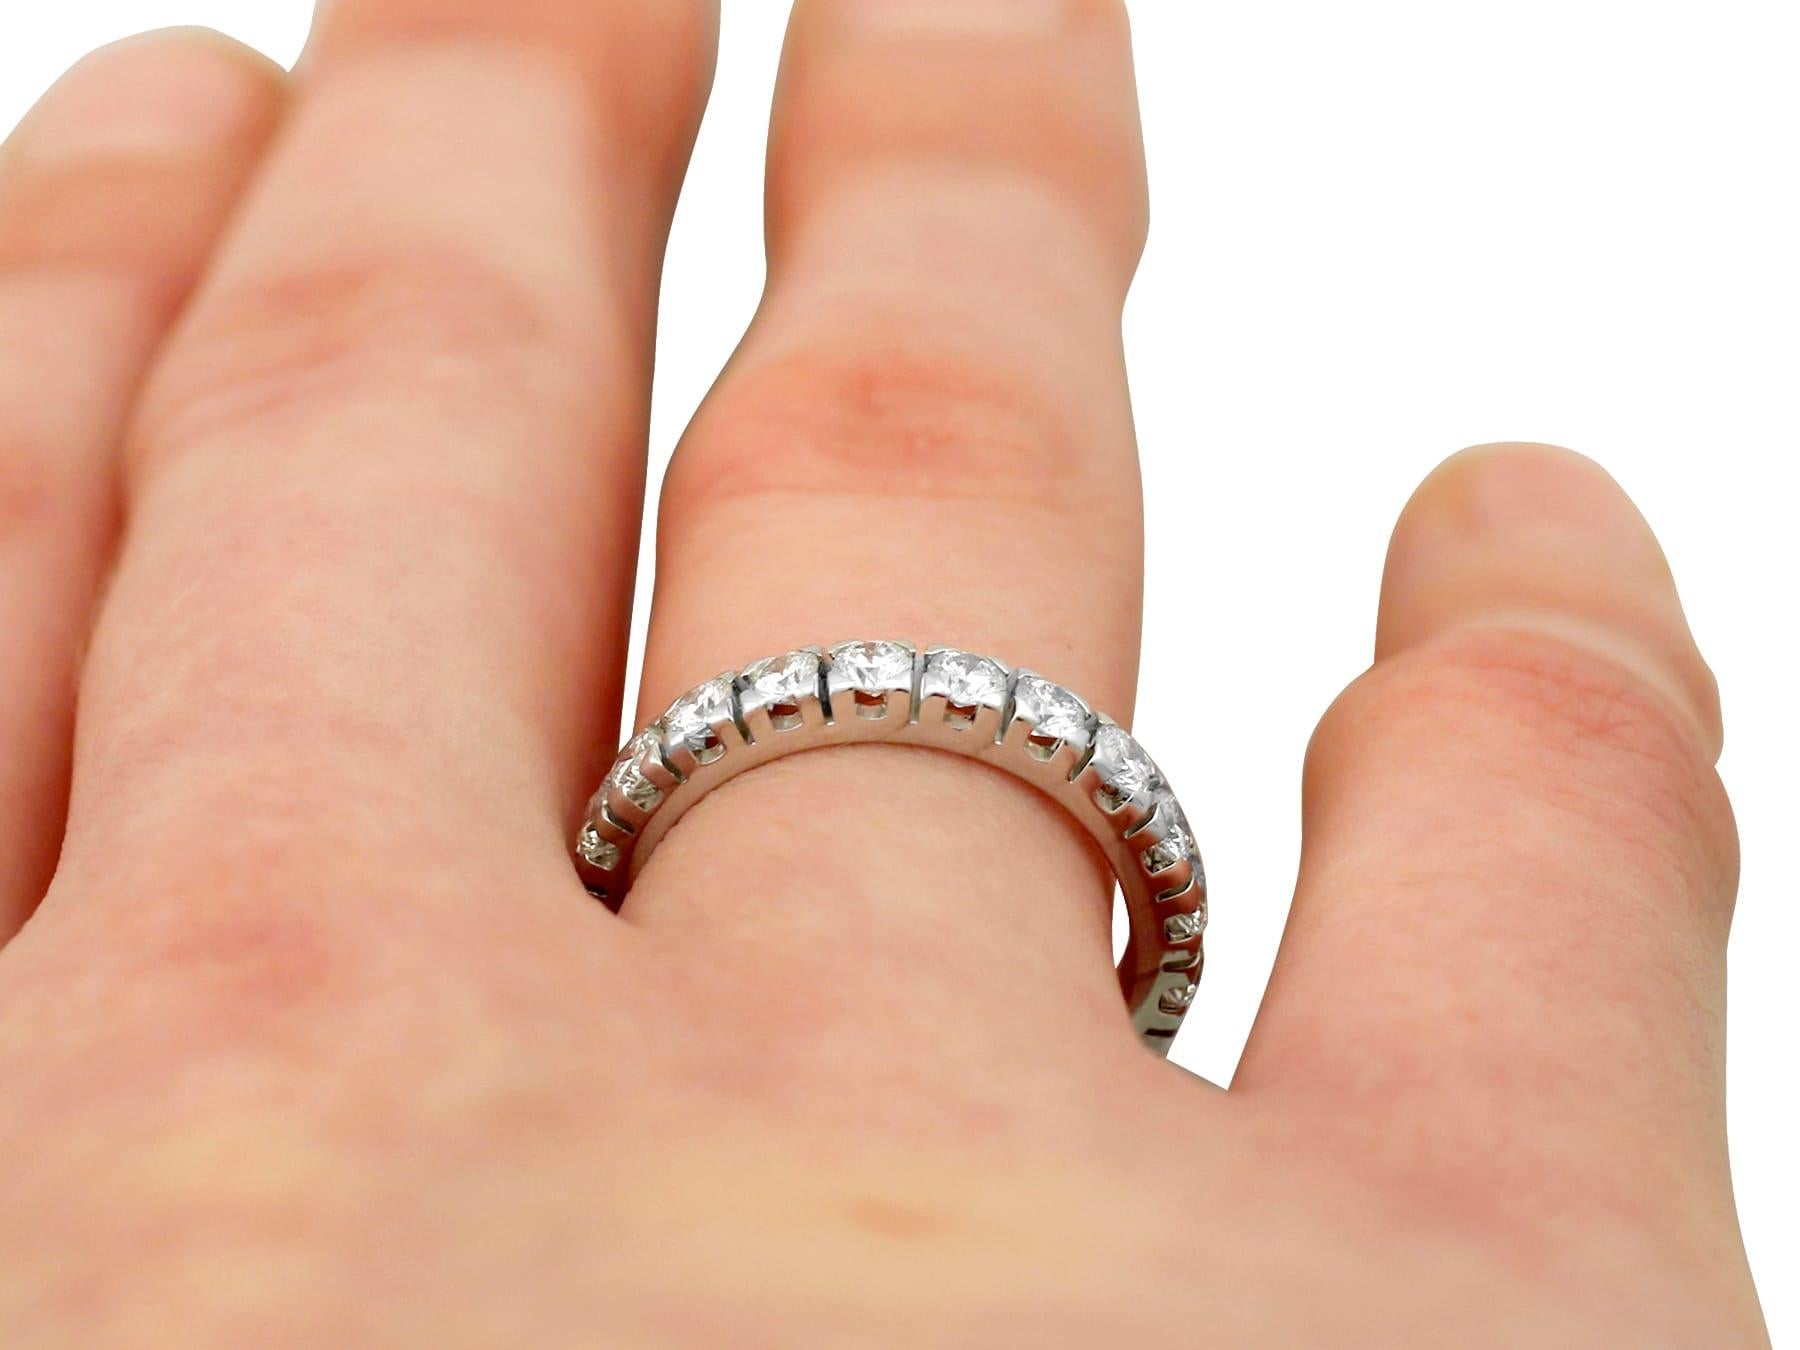 1980s Vintage 1.76 Carat Diamond and White Gold Full Eternity Ring For Sale 2